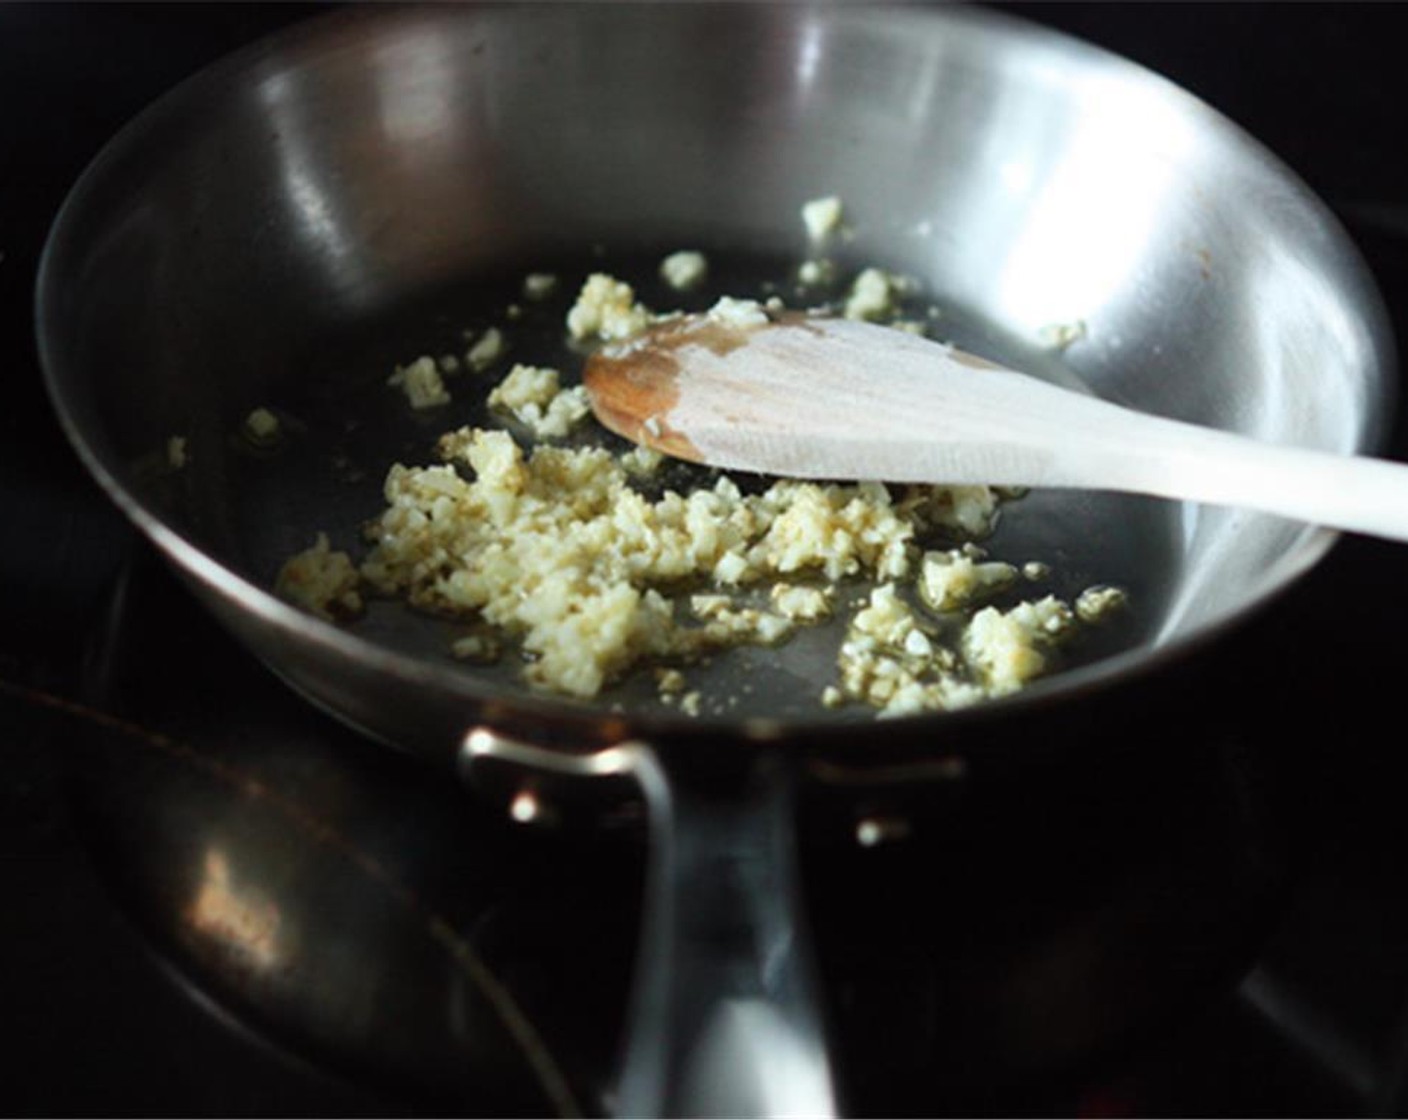 step 2 Heat Olive Oil (1 Tbsp) in a small frying pan over medium heat. When hot, add the minced garlic and saute for 3-4 minutes stirring frequently, until the garlic is a light golden color.